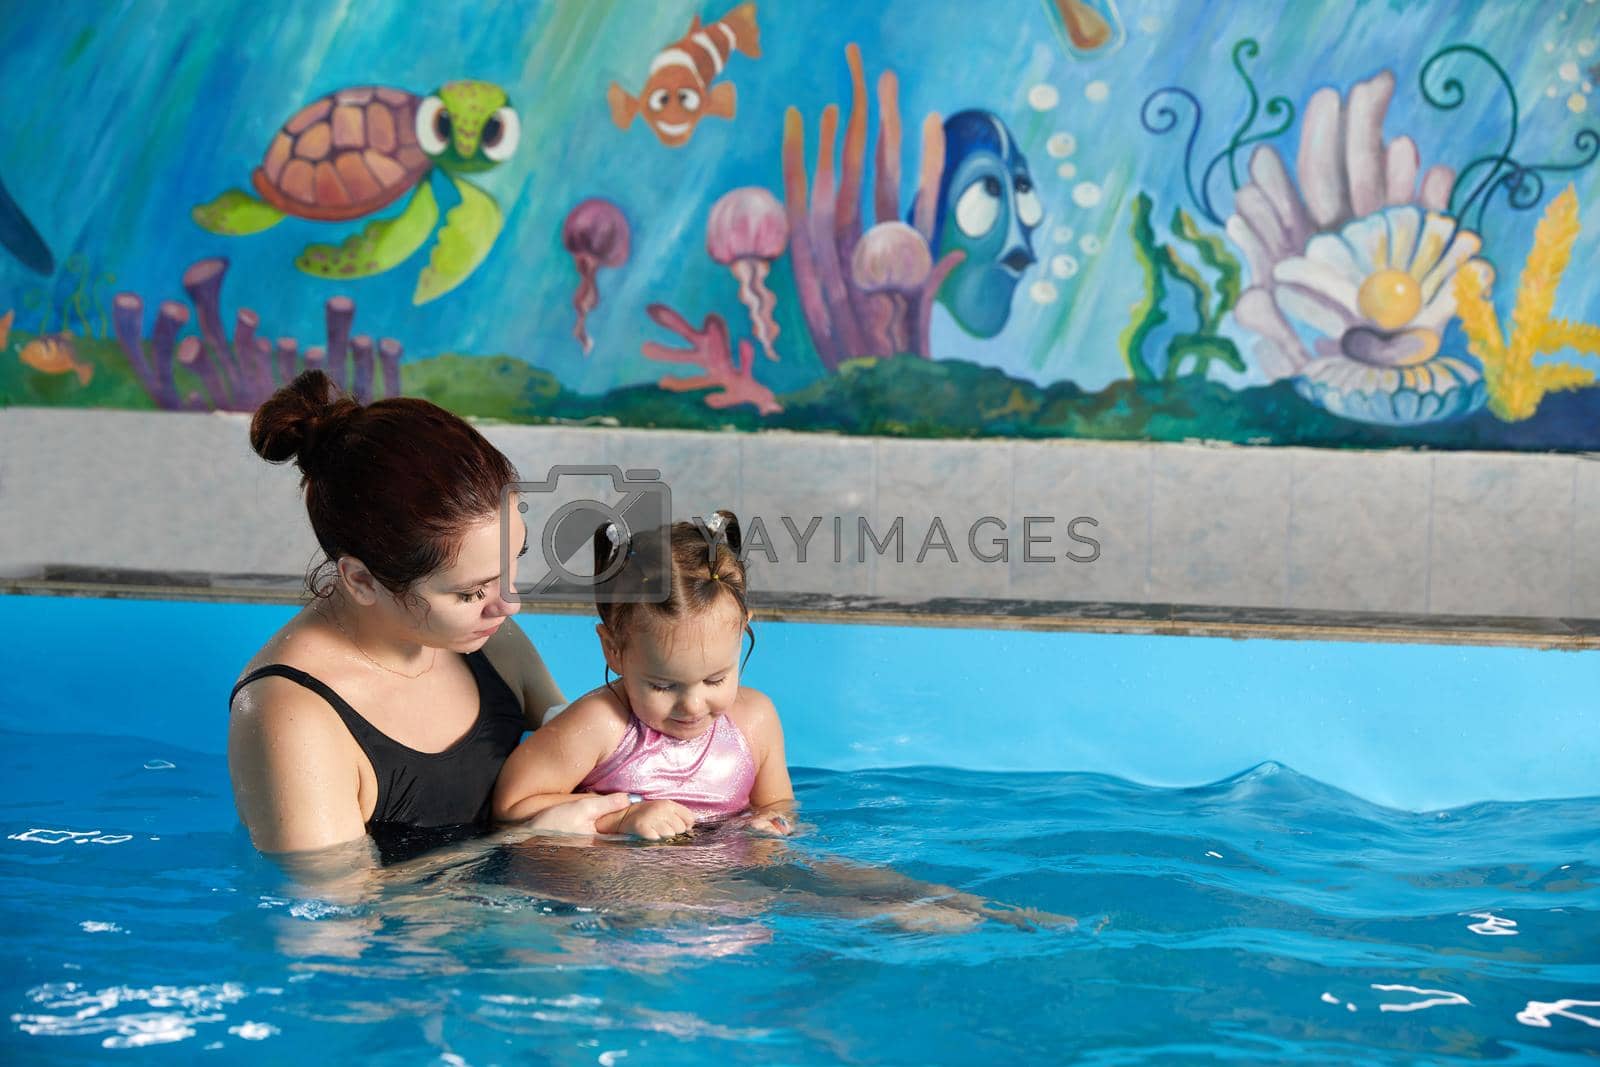 Royalty free image of Little child learning to swim in pool with teacher by Mariakray